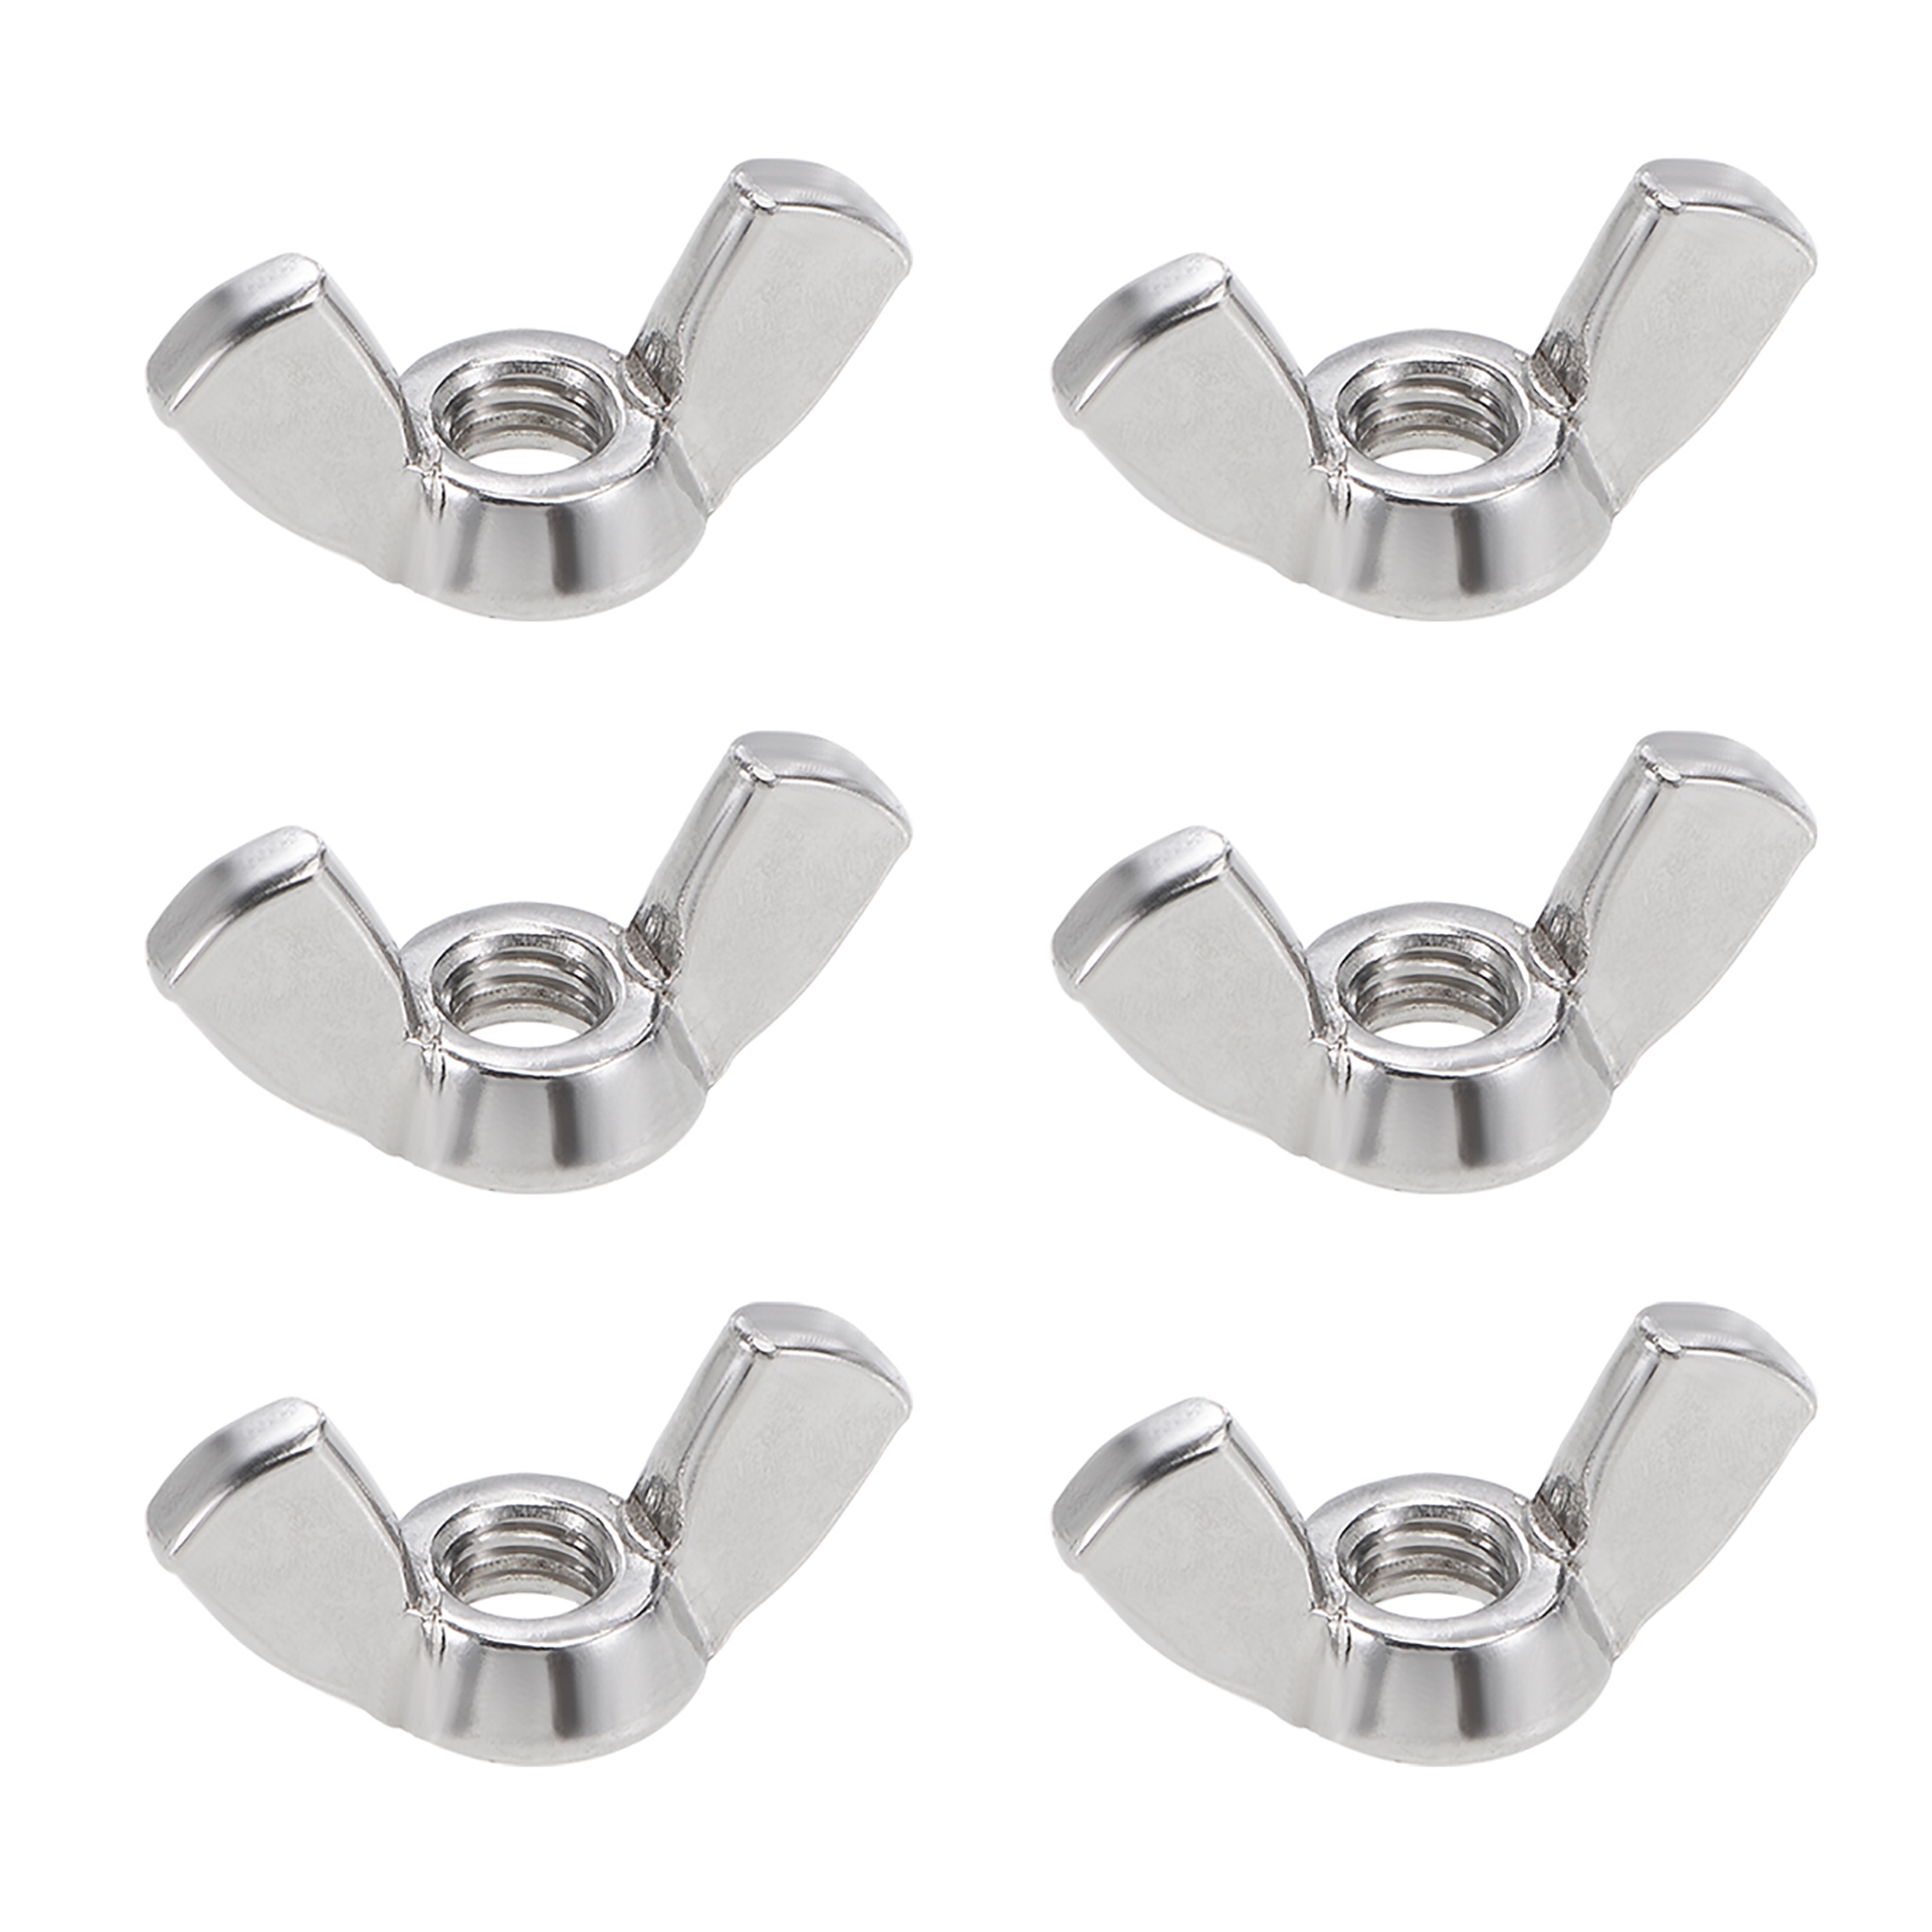 10-32 Wing Nuts 304 Stainless Steel Shutters Butterfly Nut Hand Twist Tighten Fasteners 6pcs - image 1 of 4